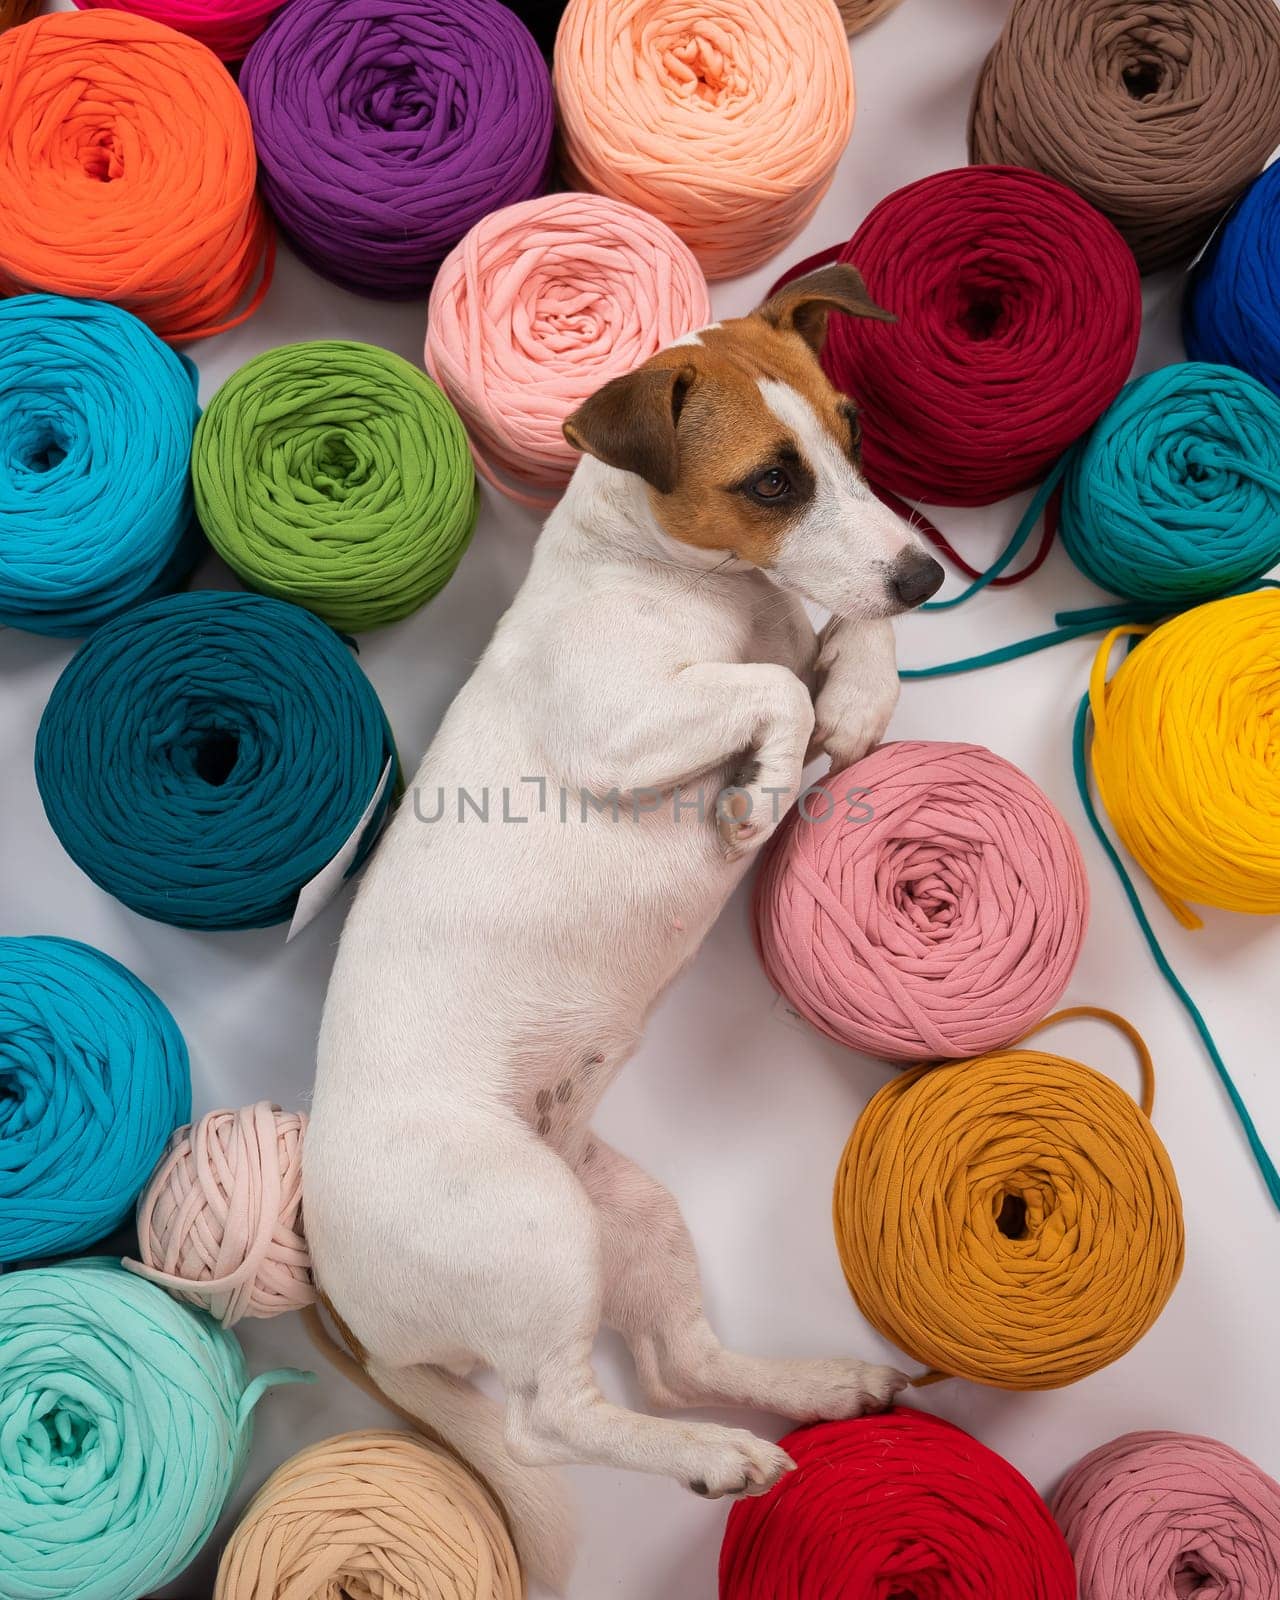 Close-up of Jack Russell Terrier dog among multi-colored cotton skeins. by mrwed54